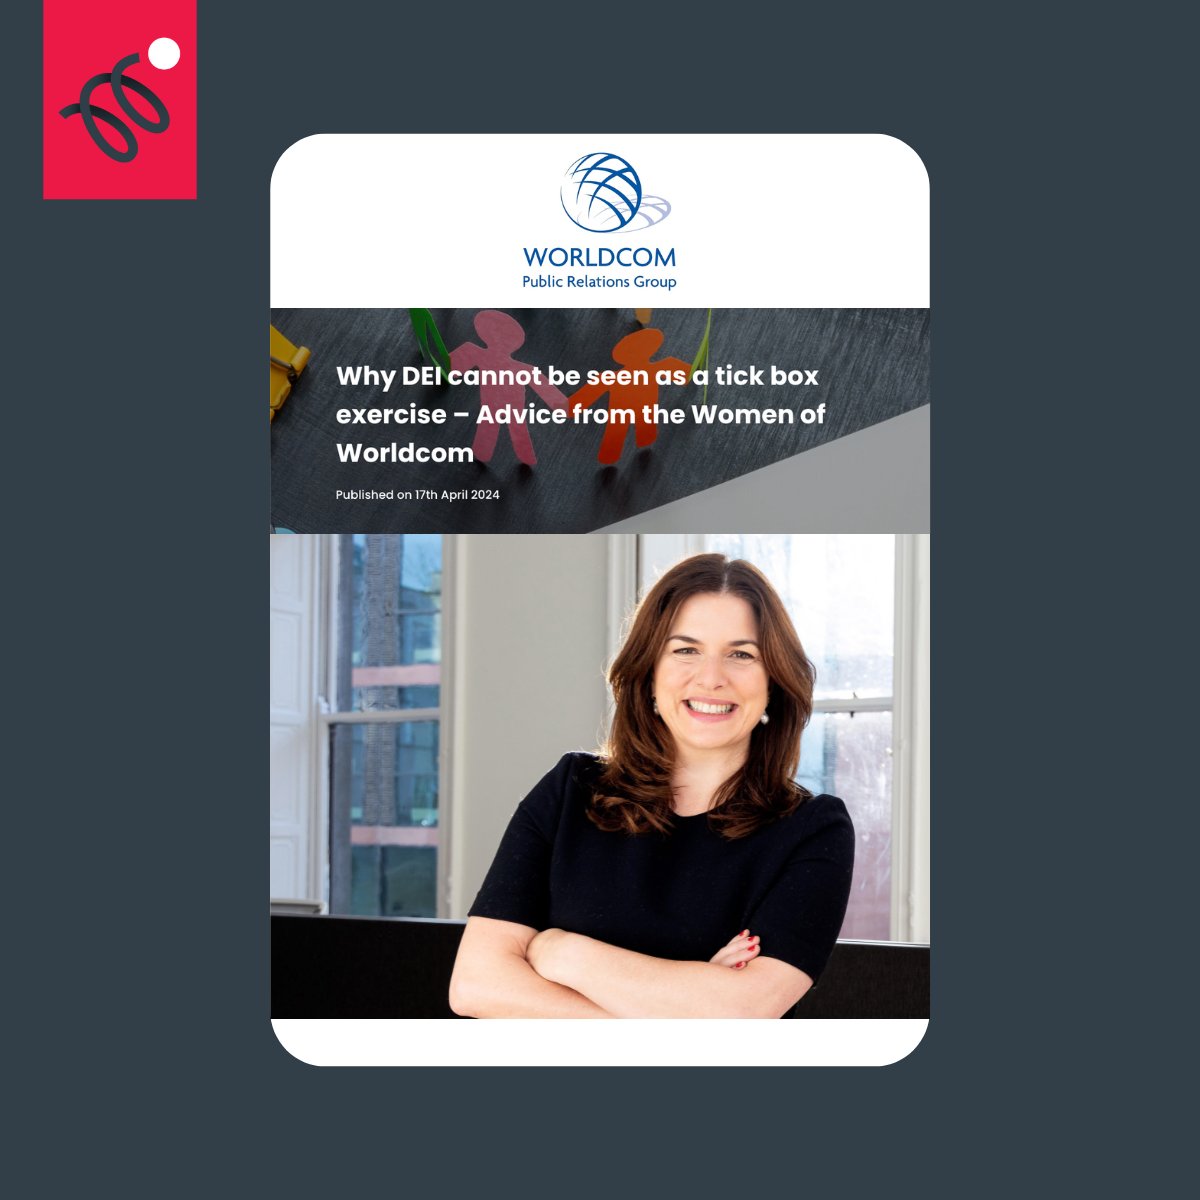 Thanks to @Worldcom_PR for including our MD, Susie Horgan, in their advice piece on why DEI cannot be seen as a 'tick the box' exercise. Click here to read more: bit.ly/3xIzJQq #SpringboardCommunications #WorldcomPartner #DiversityInclusion